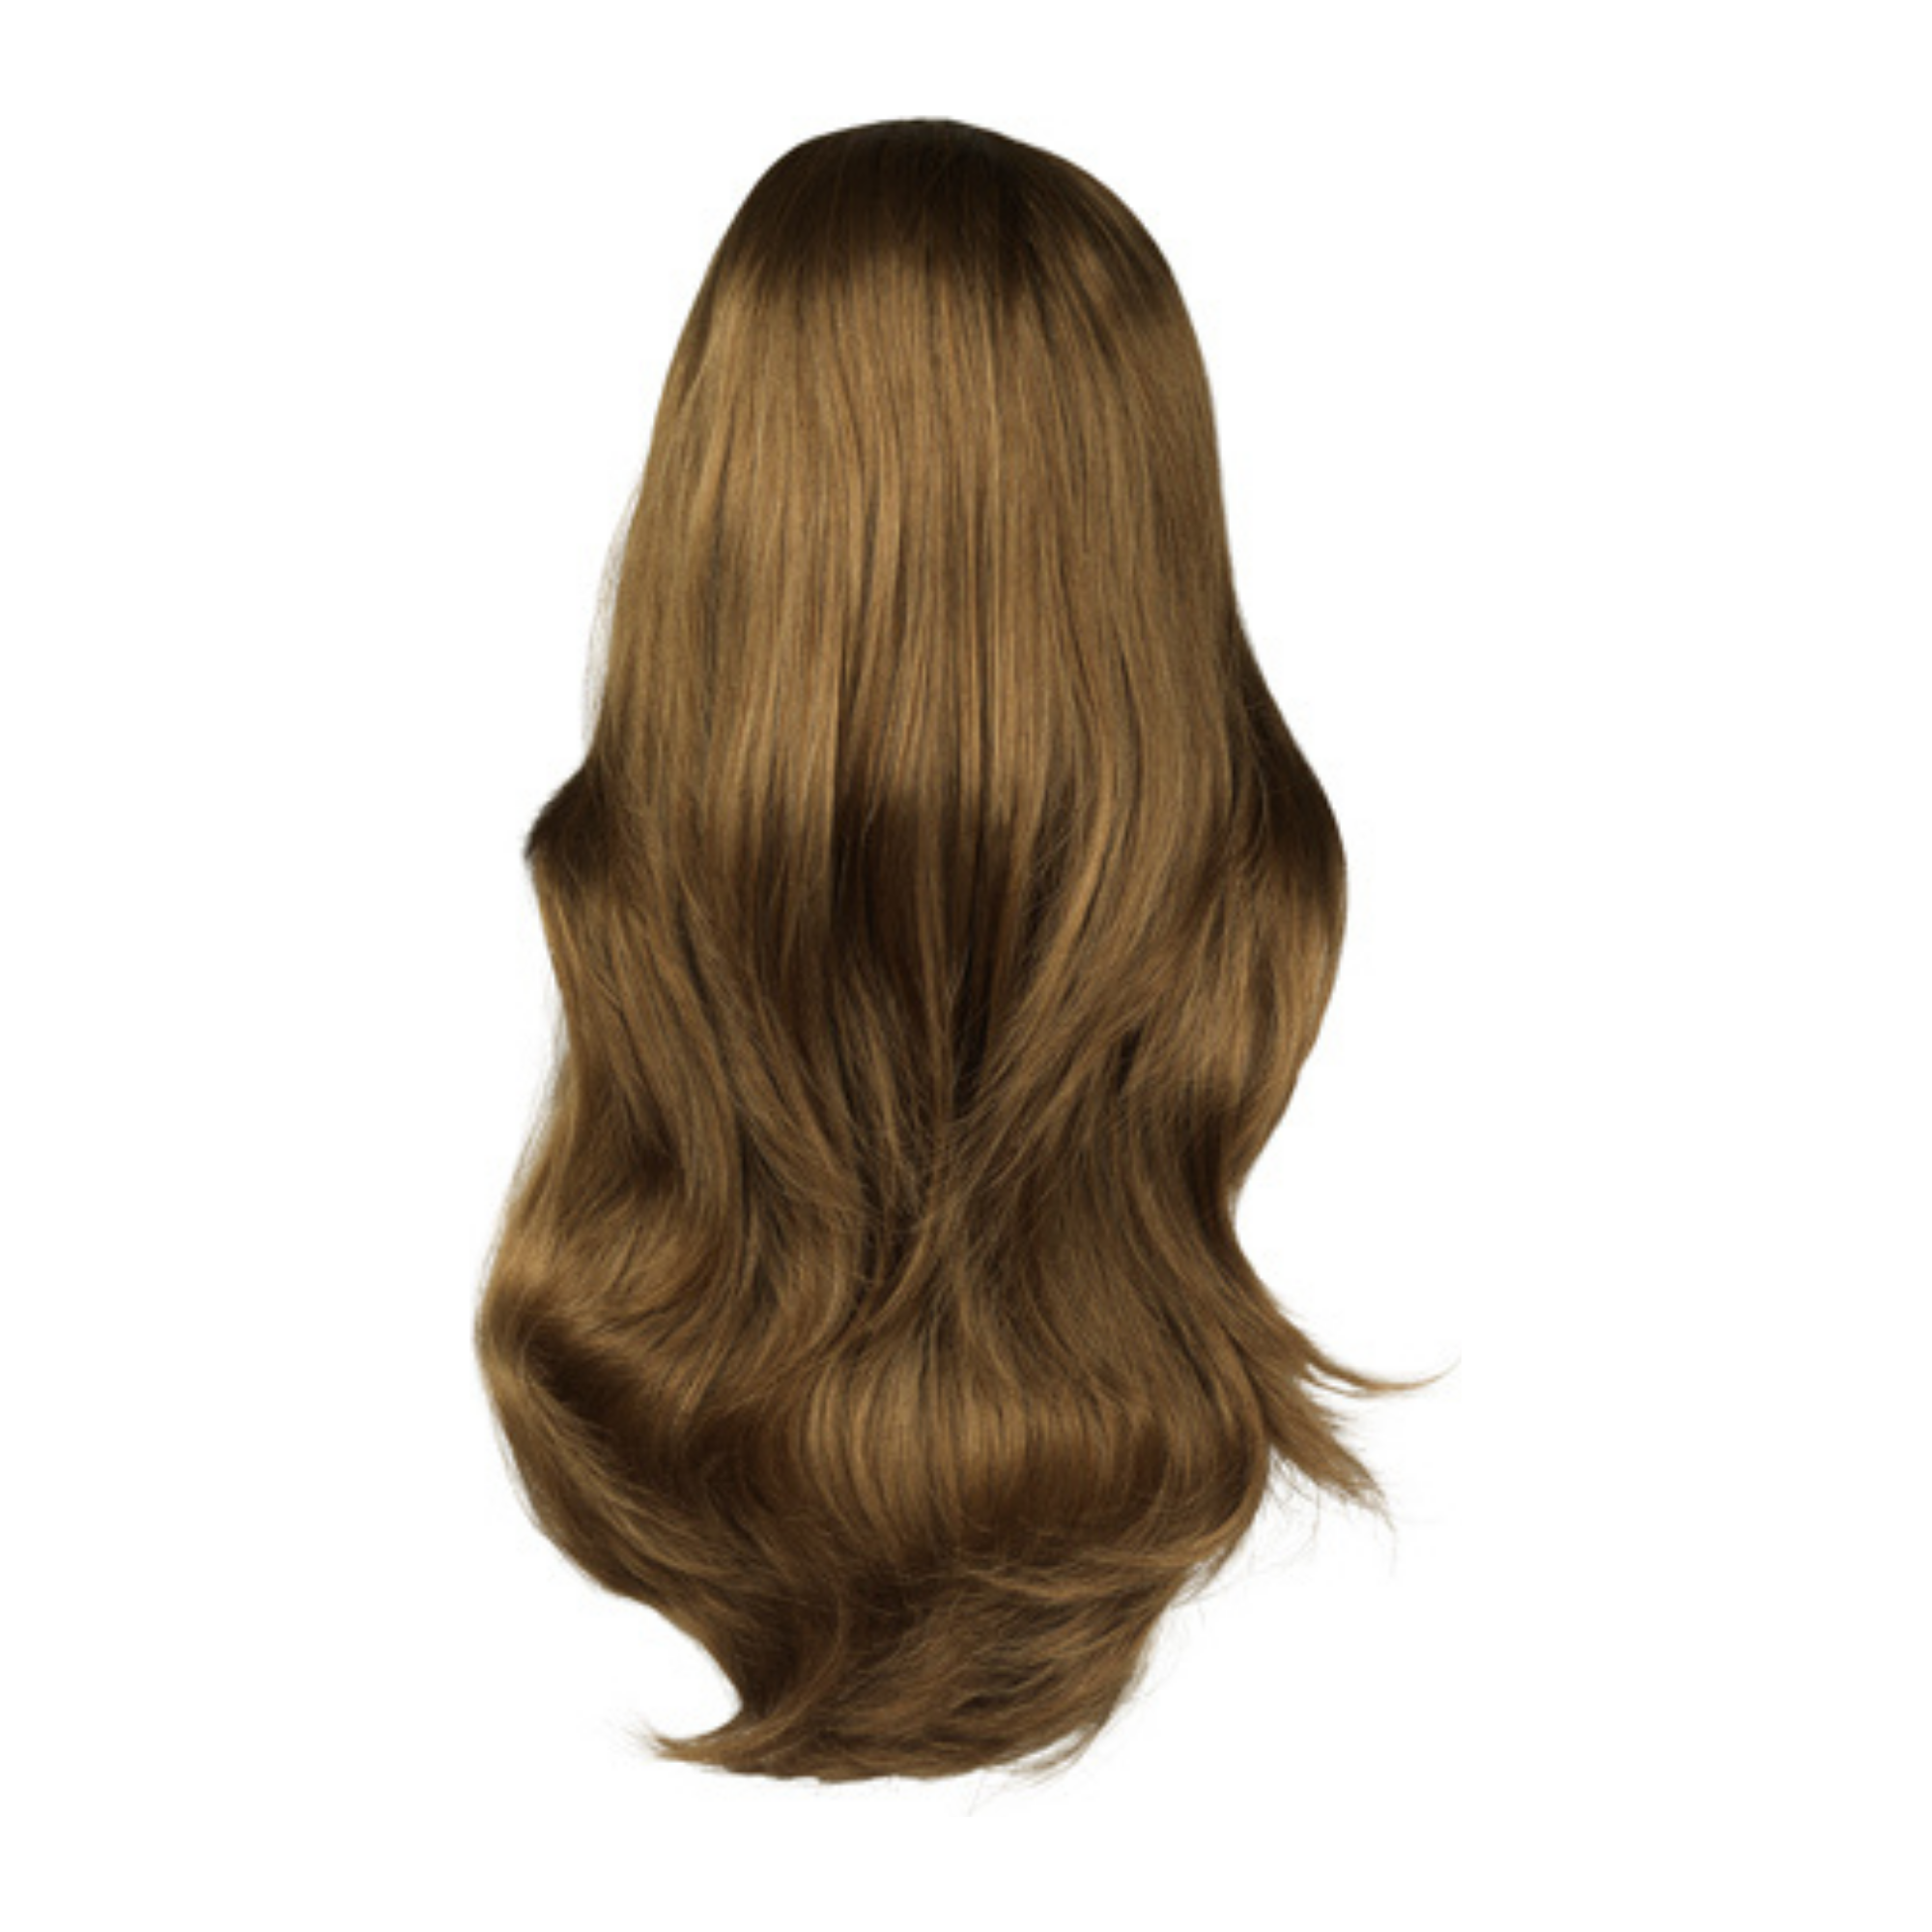 image of hair rehab london half wig hairpiece in shade bronze